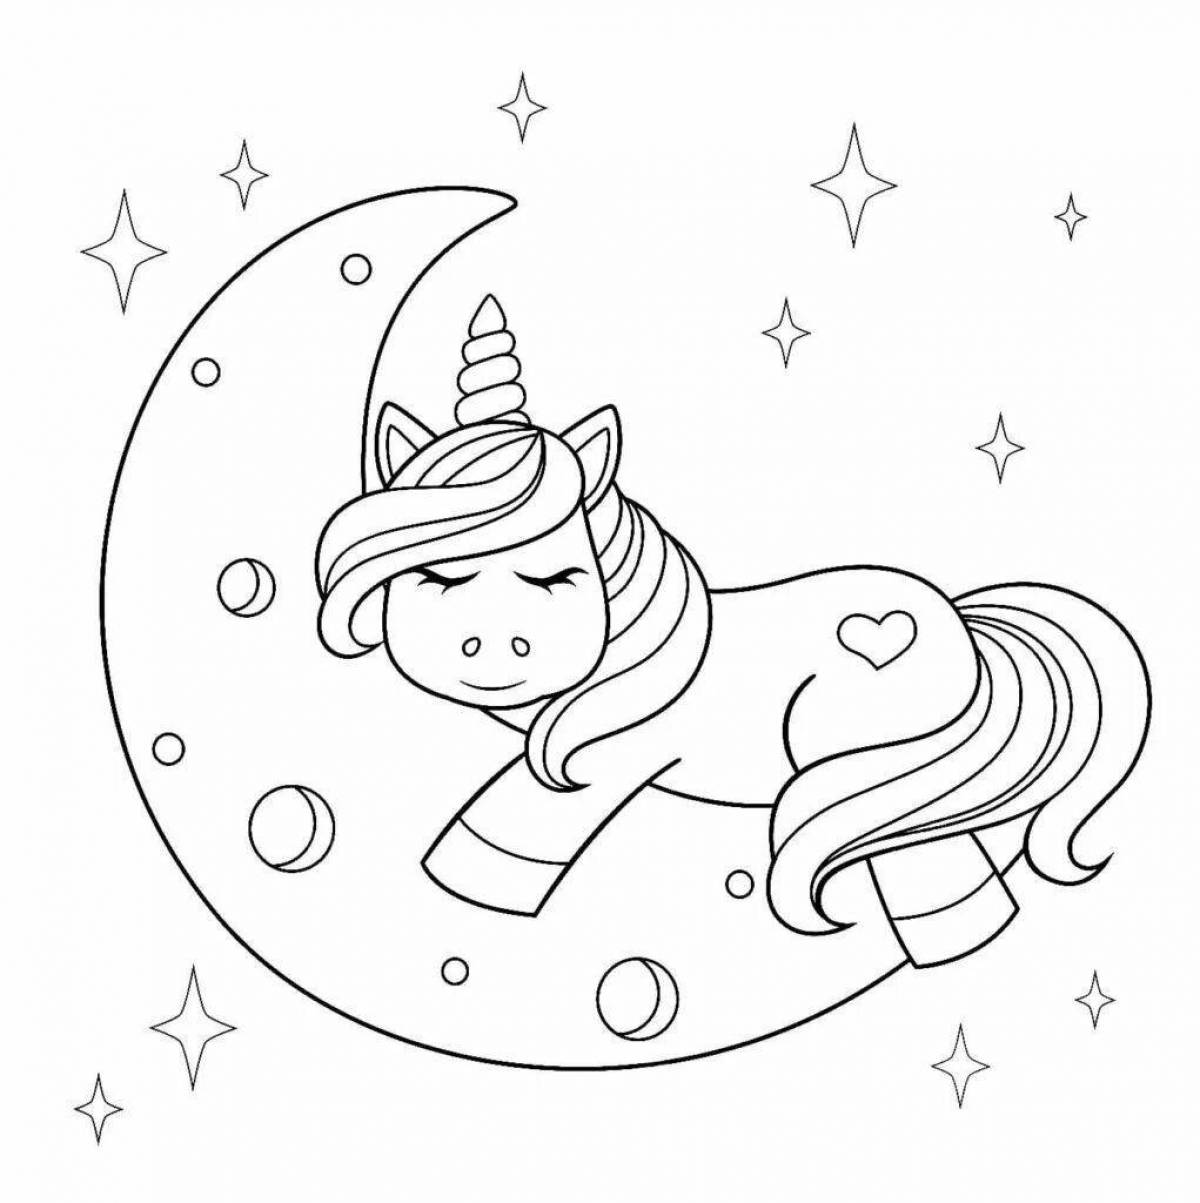 Radiant coloring page bunny unicorn